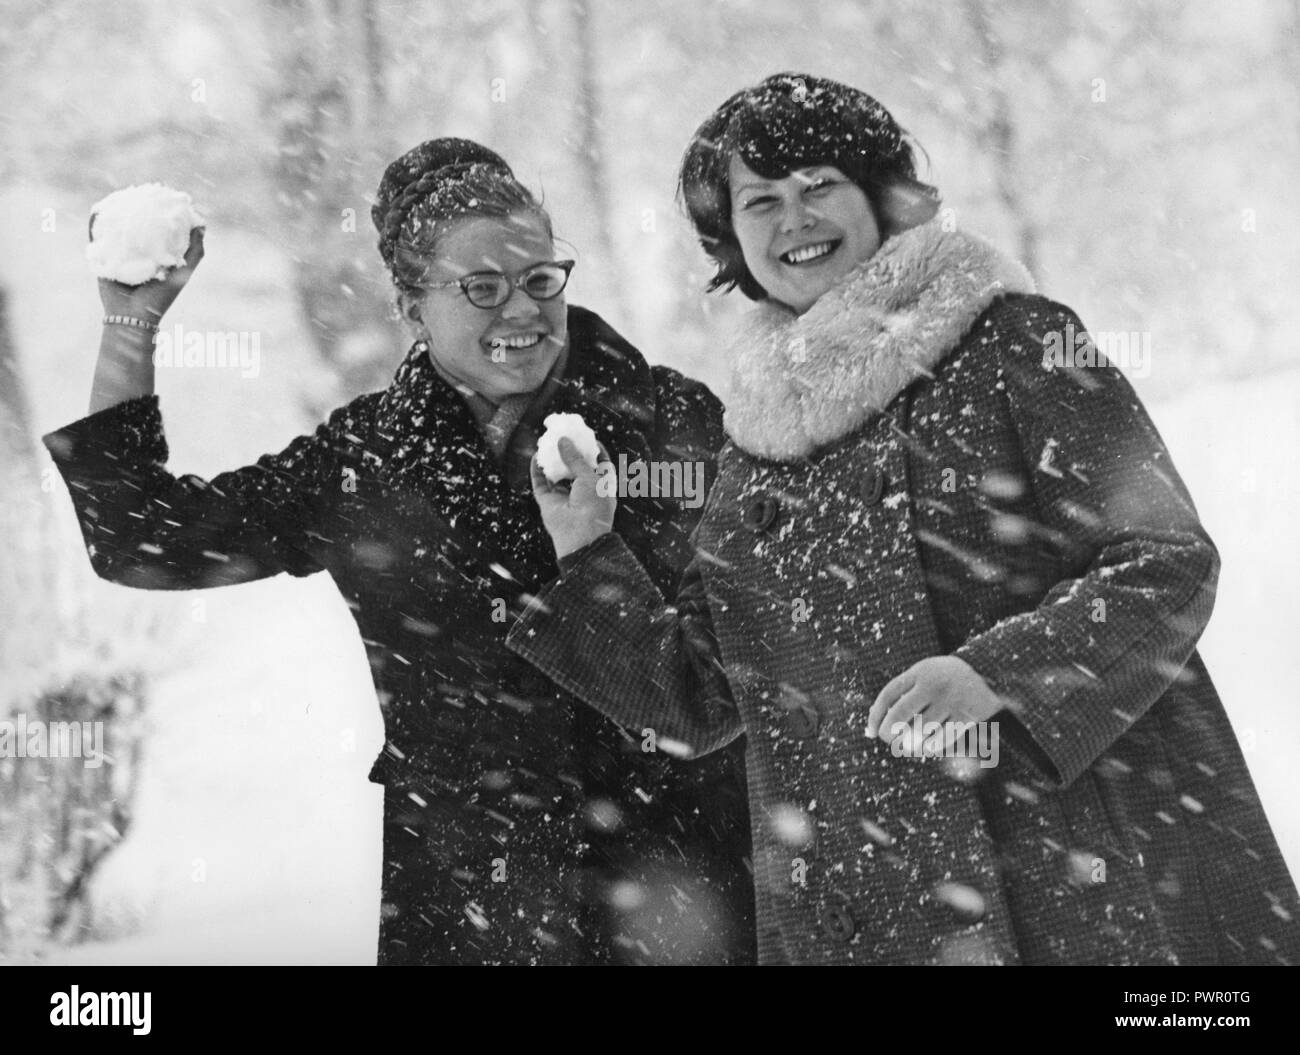 Winter in the 1960s. Two young women is aiming and about to throw snowballs at the photographer. The snow is falling and they are dressed warm with winter coats. Sweden 1964 Stock Photo